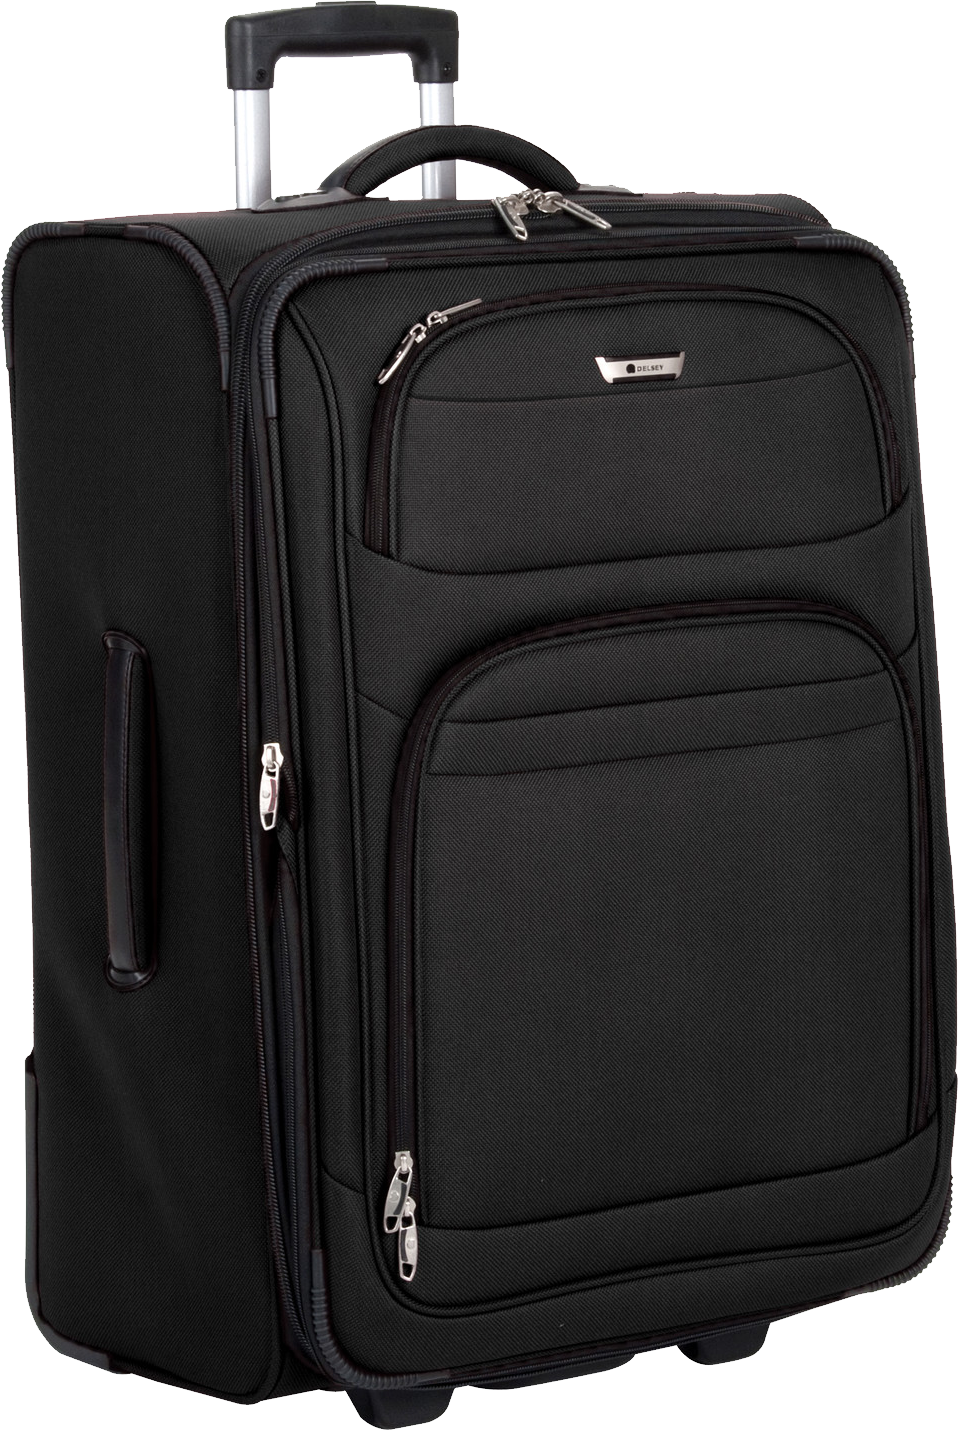 Black Wheeled Carry On Luggage PNG